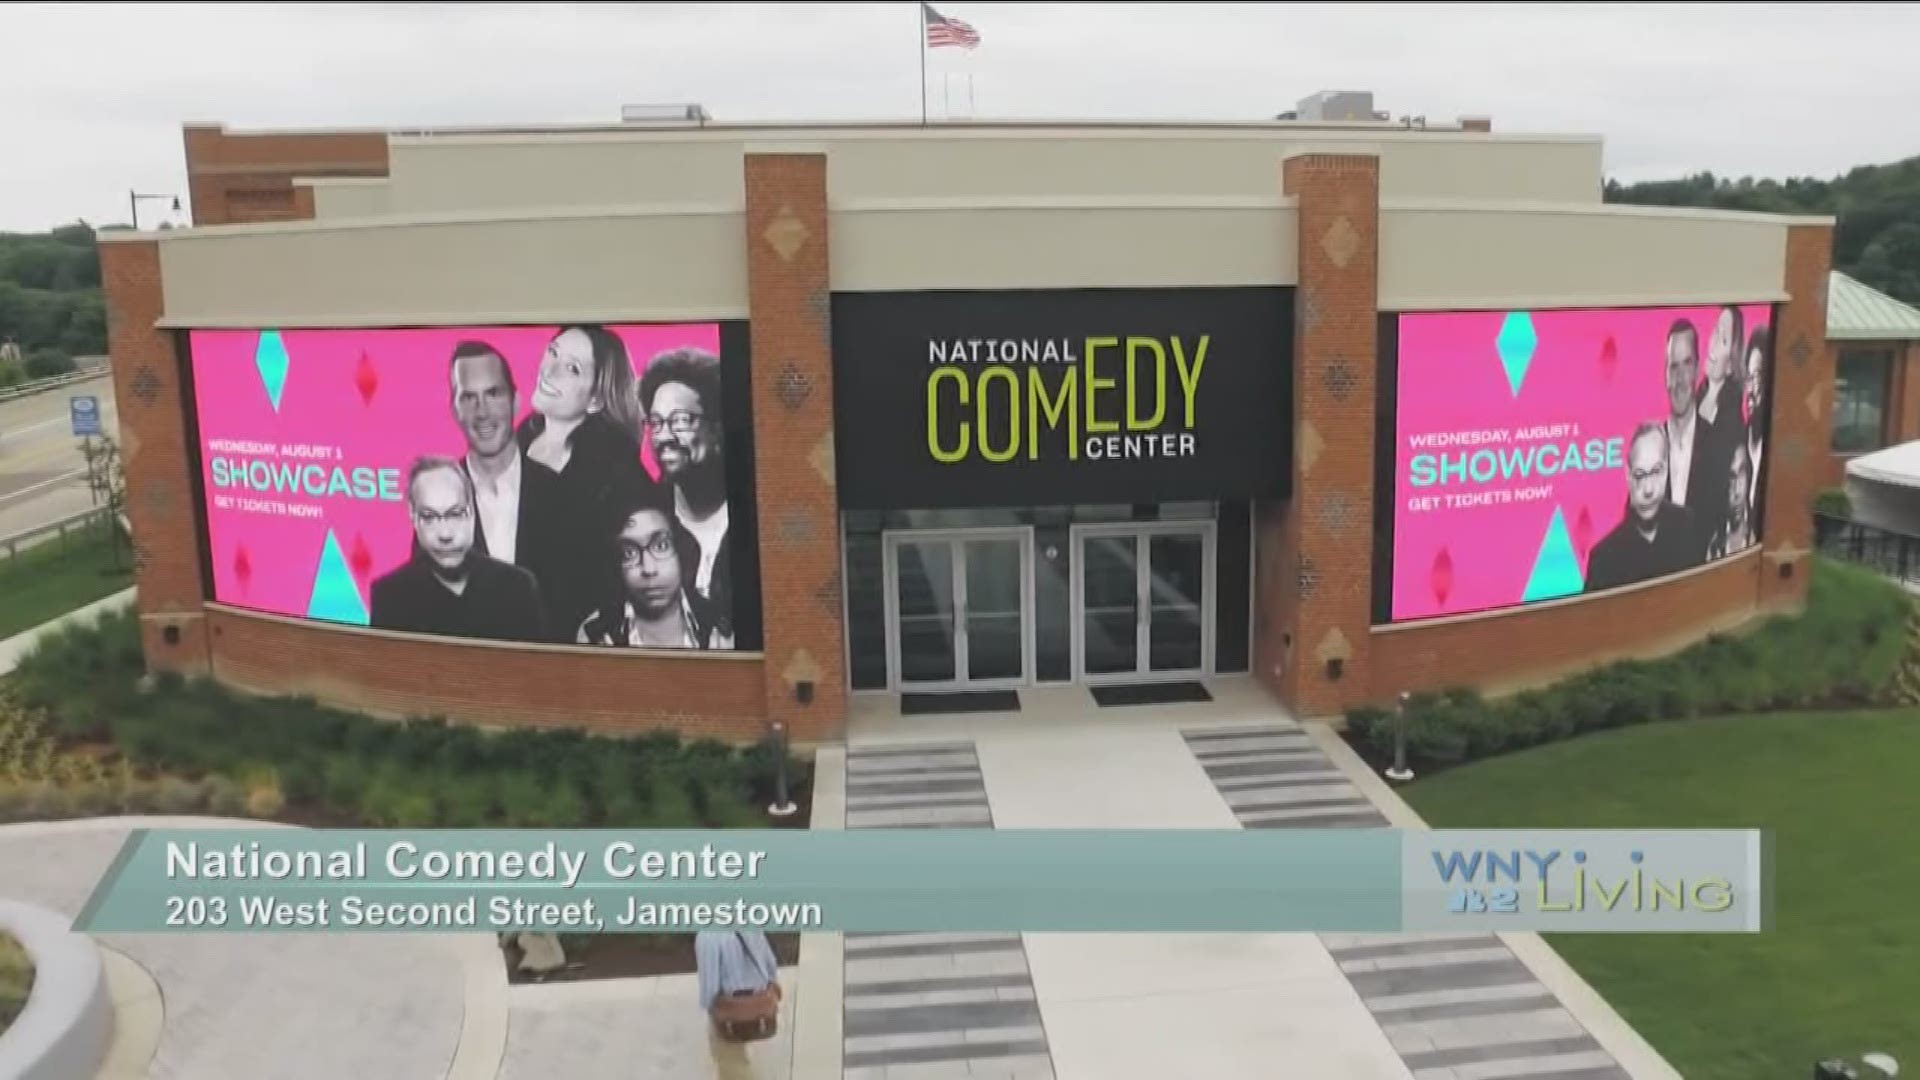 WNY Living - July 6 - National Comedy Center (SPONSORED CONTENT)